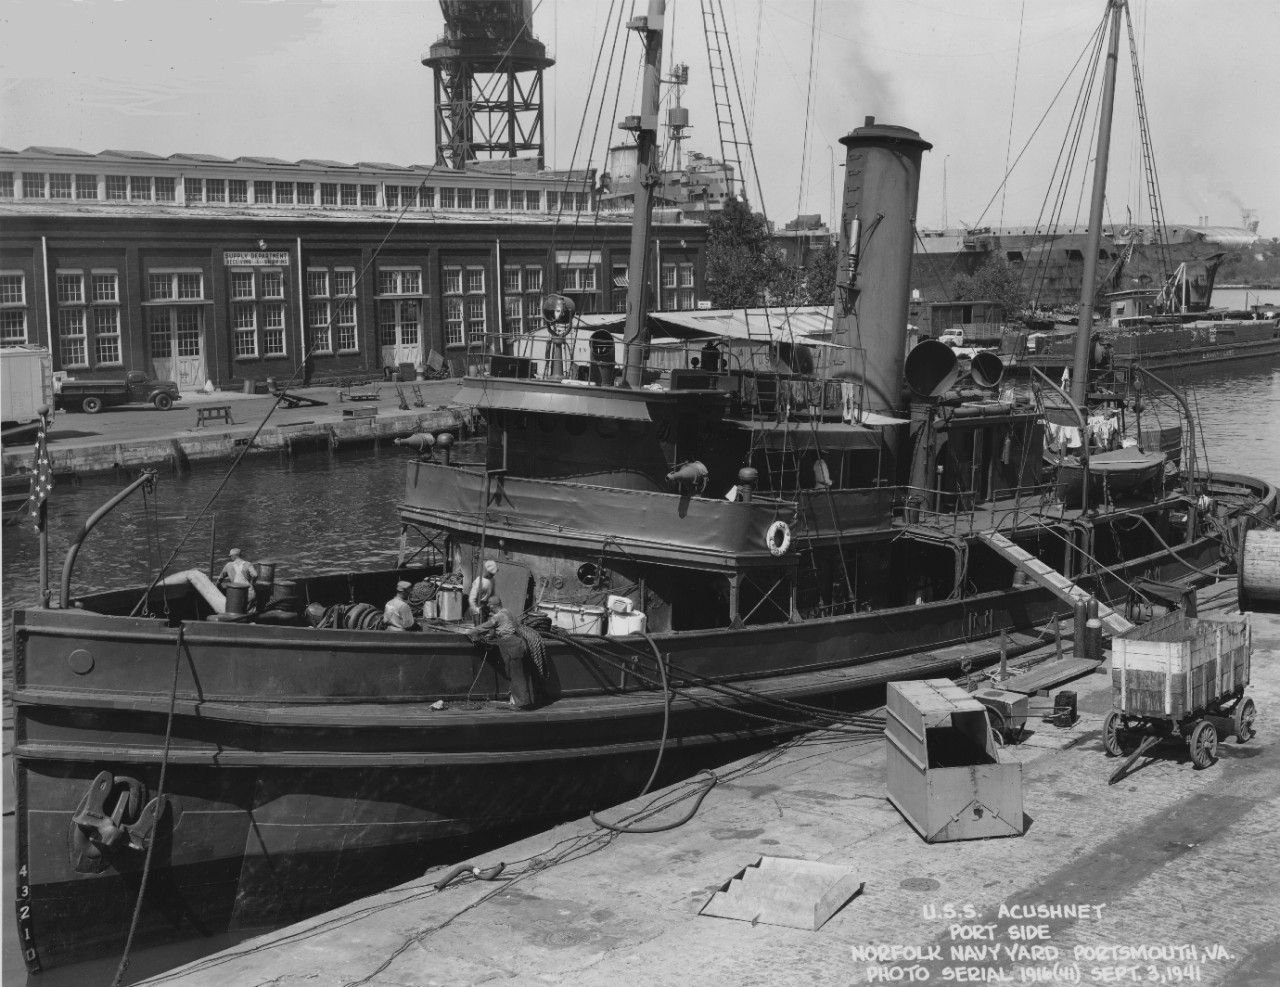 Acushnet moored at the Norfolk Navy Yard, 3 September 1941. The British fleet carrier HMS Illustrious, undergoing repairs after her ordeal off Malta the previous January, can be seen in the background. Also visible are the covered lighter YF-244 ...